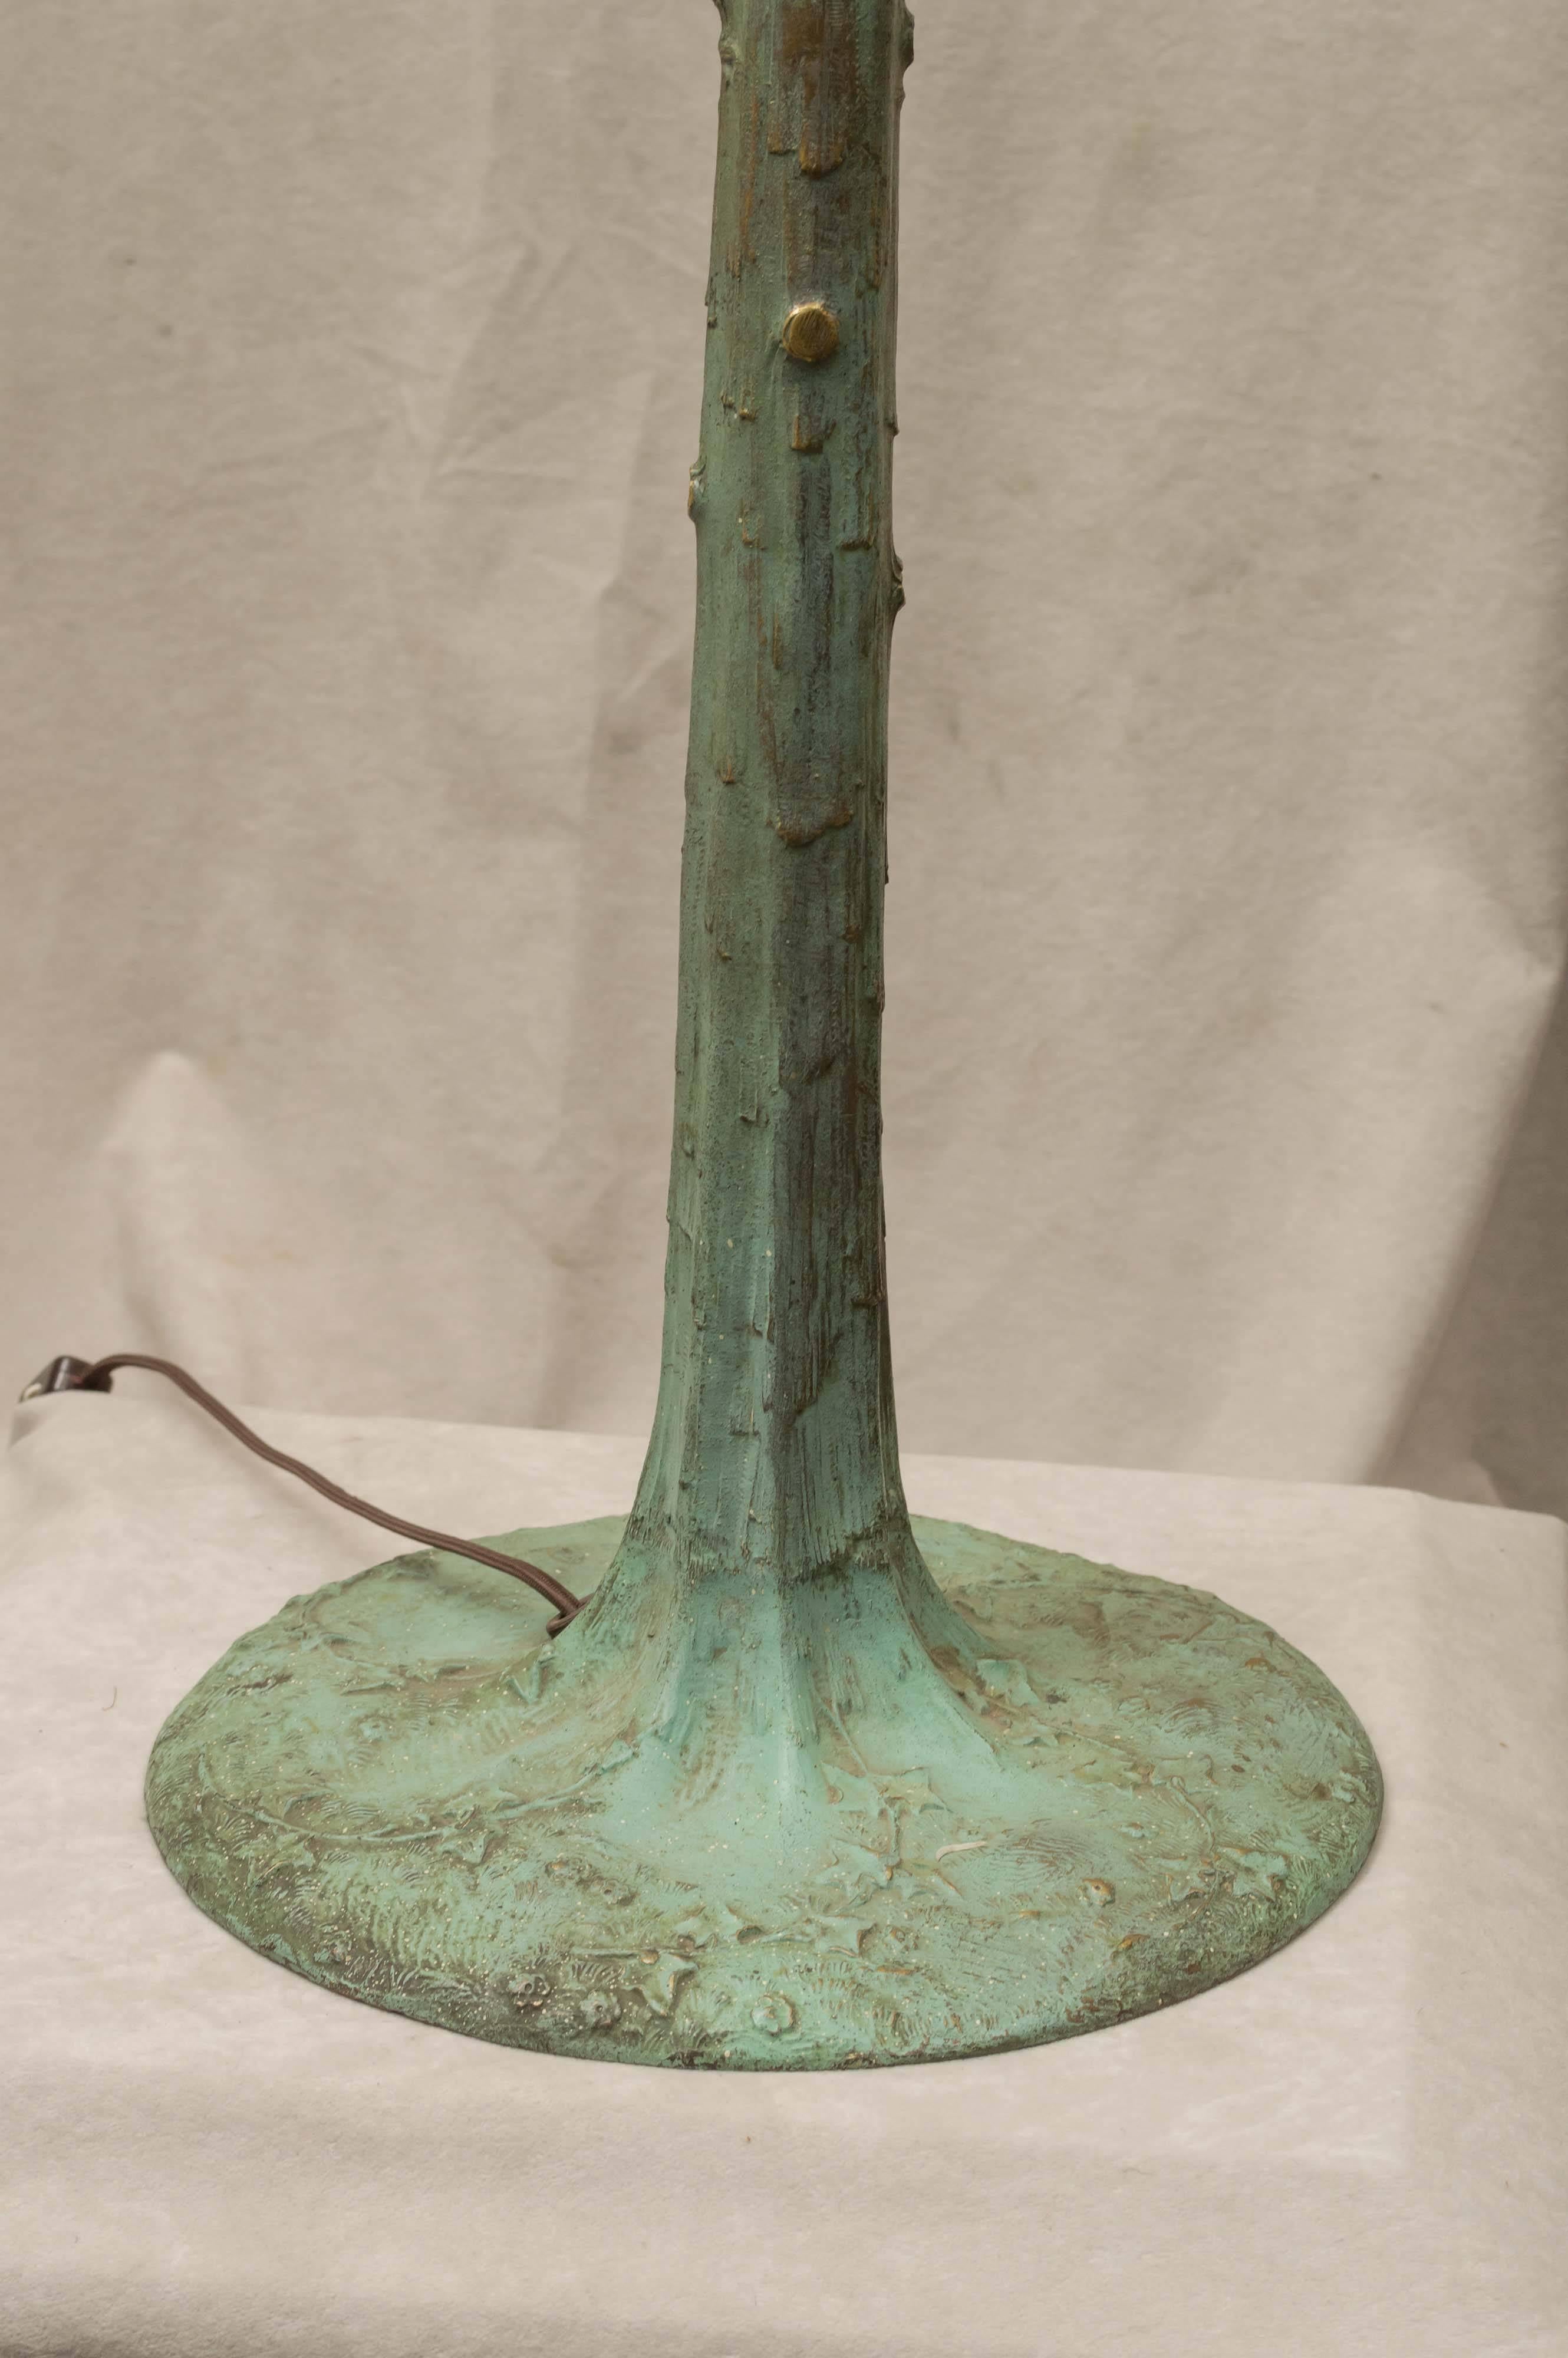 Early 20th Century Large Leaded Glass Table Lamp, circa 1910 by the Miller Lamp Company